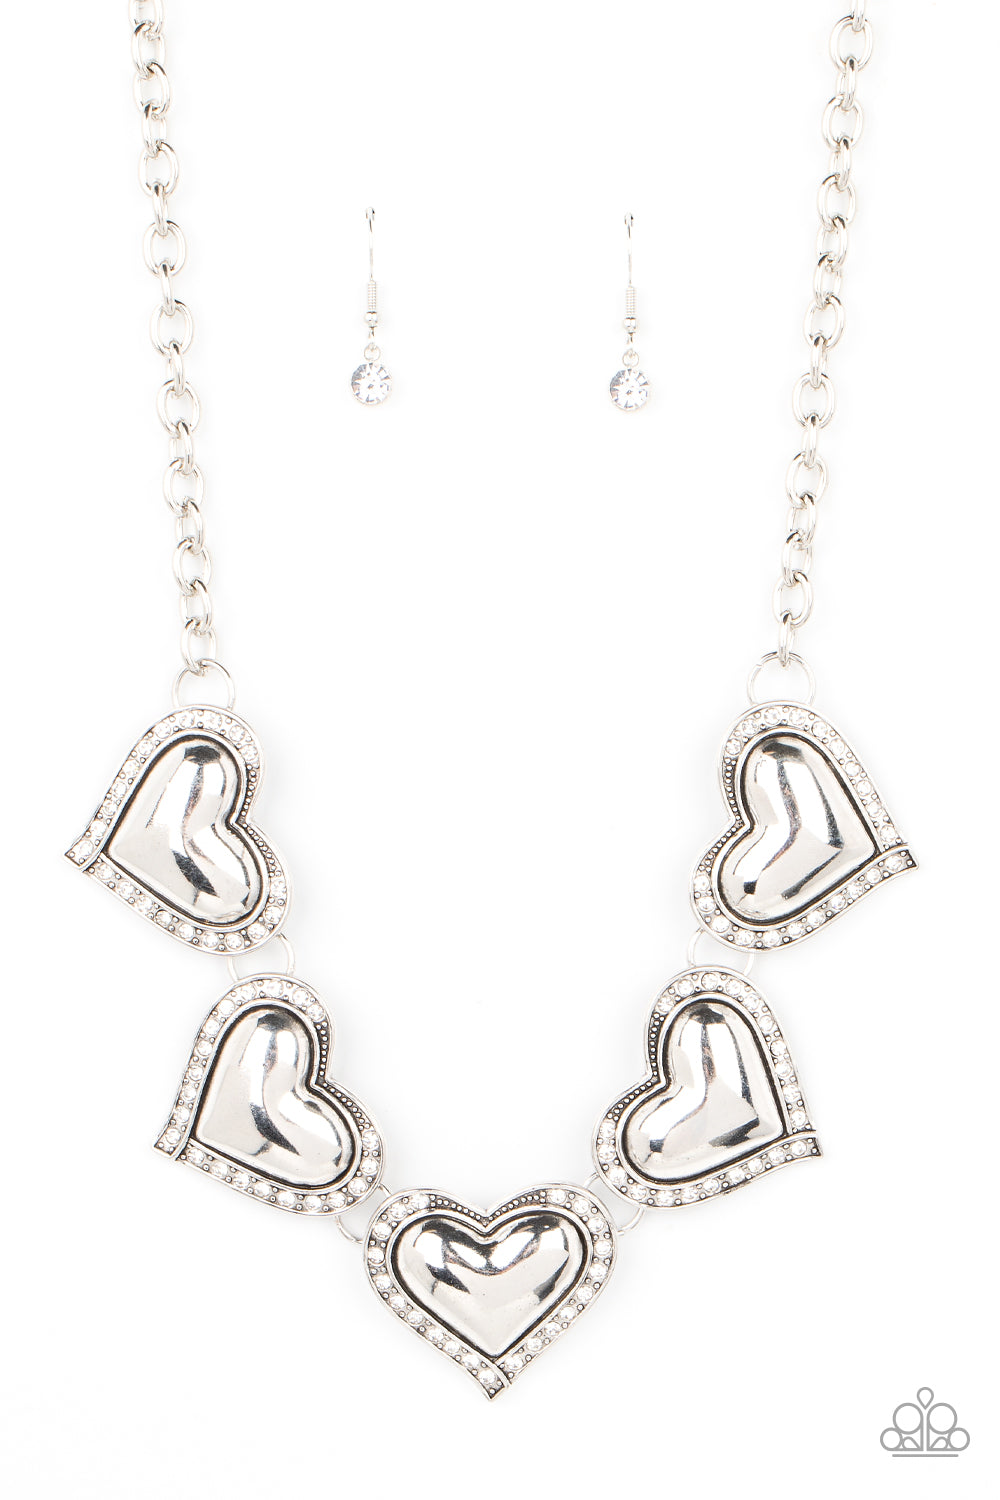 Paparazzi Accessories - Kindred Hearts - White